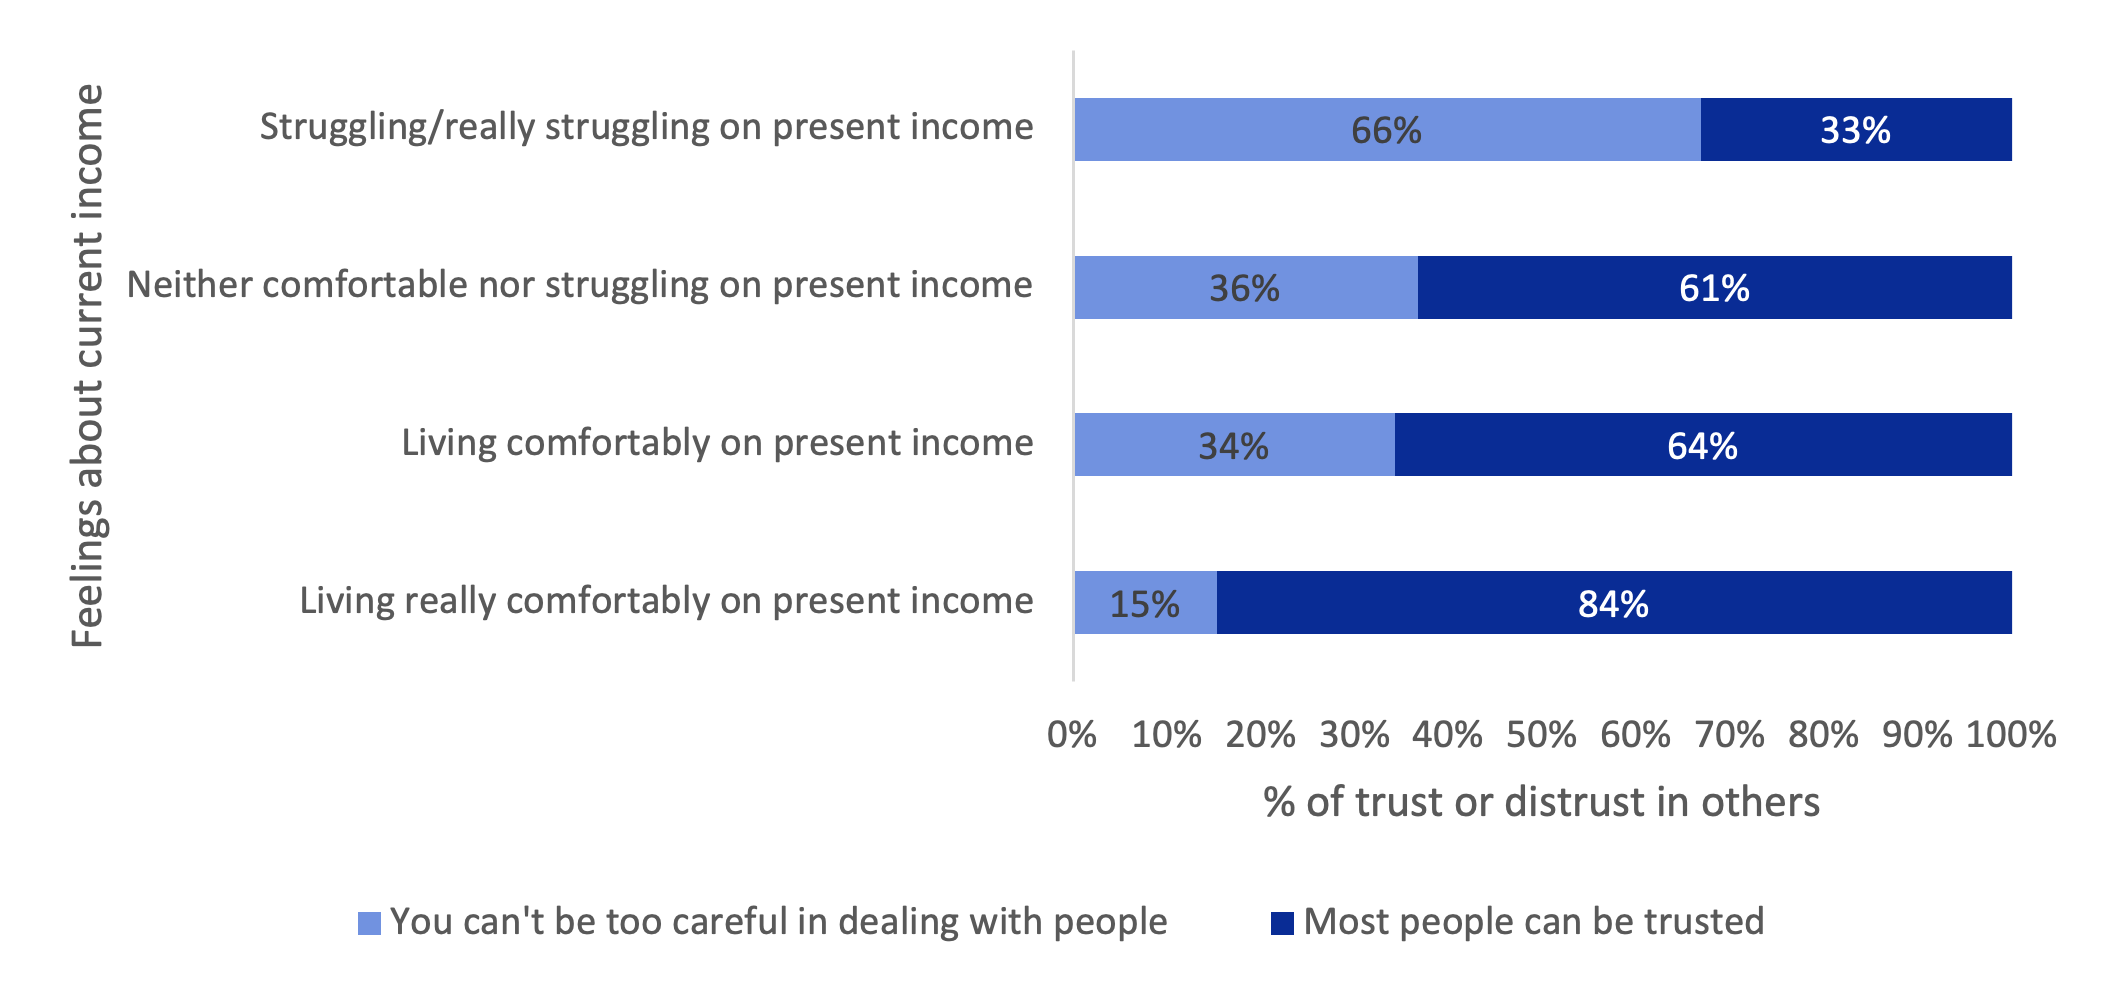 Bar chart visualising relationship between levels of trust in others and respondents feels about their current level of income. The results suggest that those who feel that they are struggling financially on their present incomes have lower levels of trust than those who describe themselves as ‘living really comfortably’.